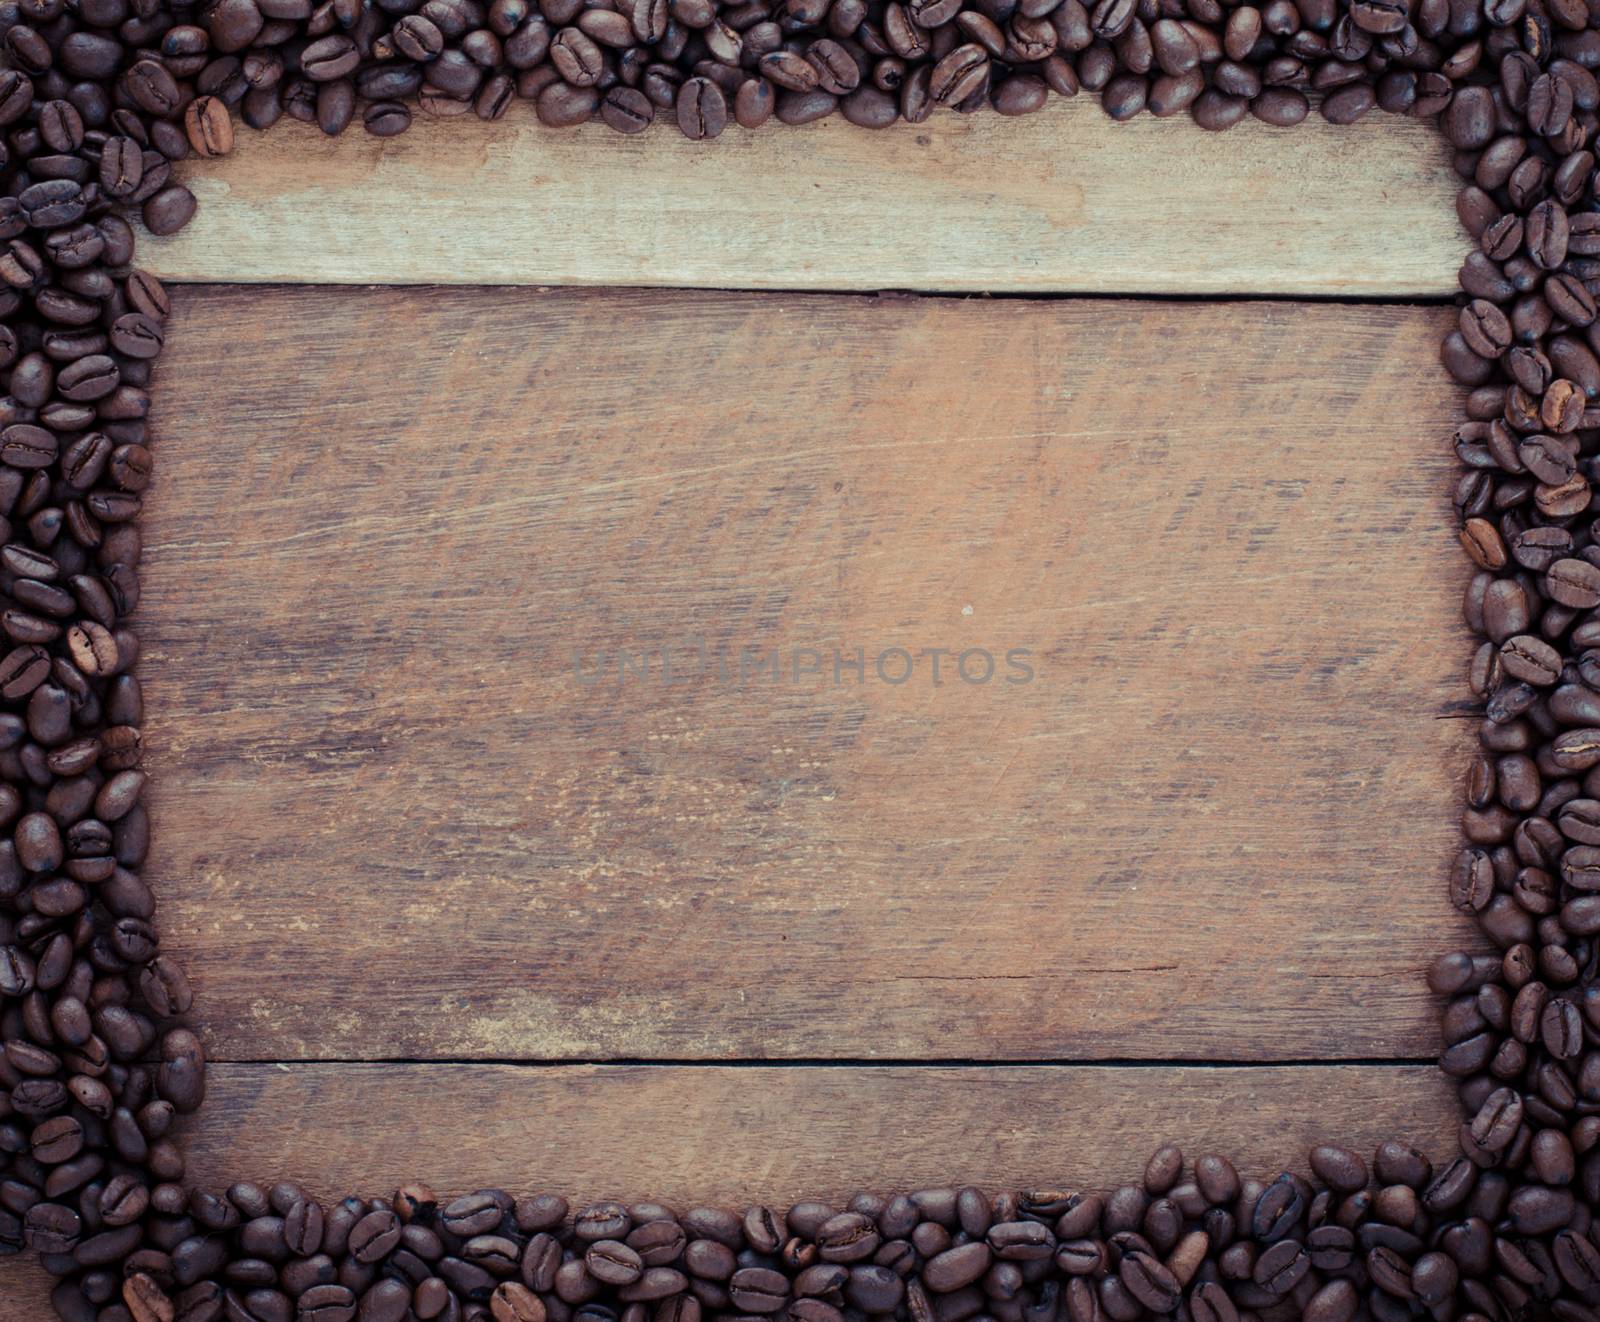 Rectangle frame made of coffee beans on the wooden background by photobyphotoboy